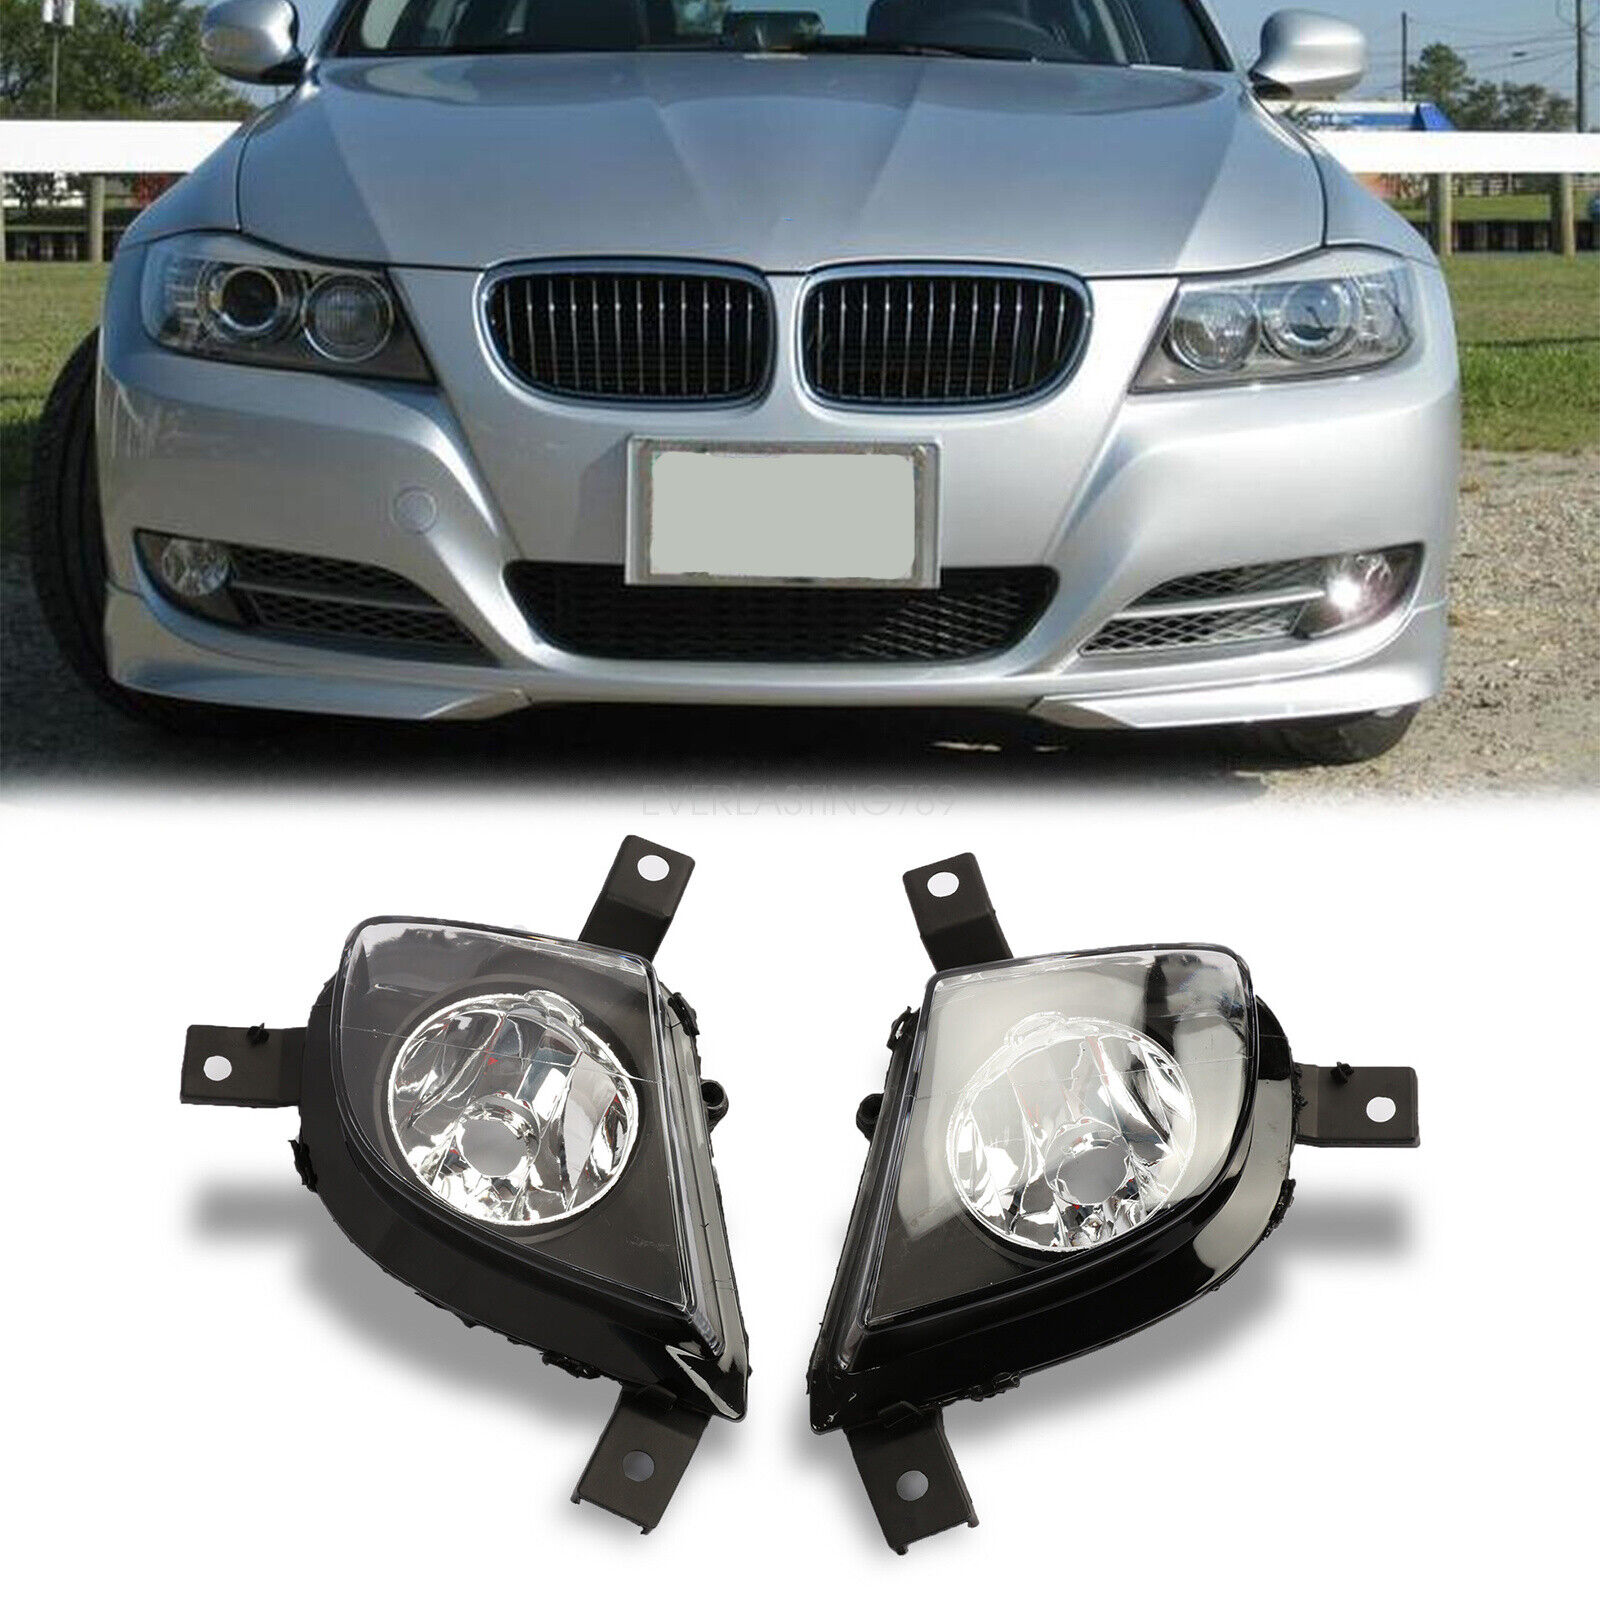 Front Bumper Replace Clear Fog Lights Lamps Pair For BMW E90 E91 328i 335i 09-11